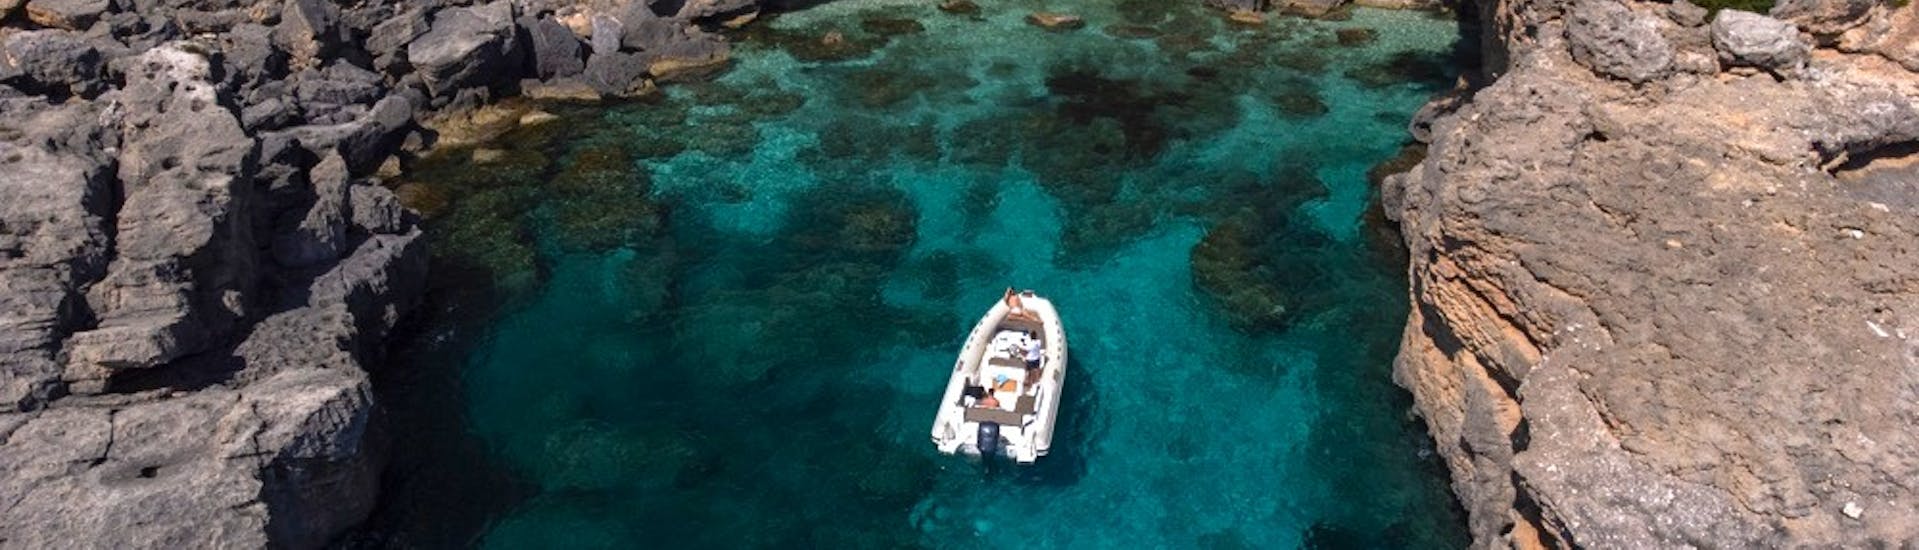 The RIB boat used for the RIB Boat Rental in Cala Gonone (up to 5 people) with Nuovo Consorzio Trasporti Marittimi is navigating in the sea.